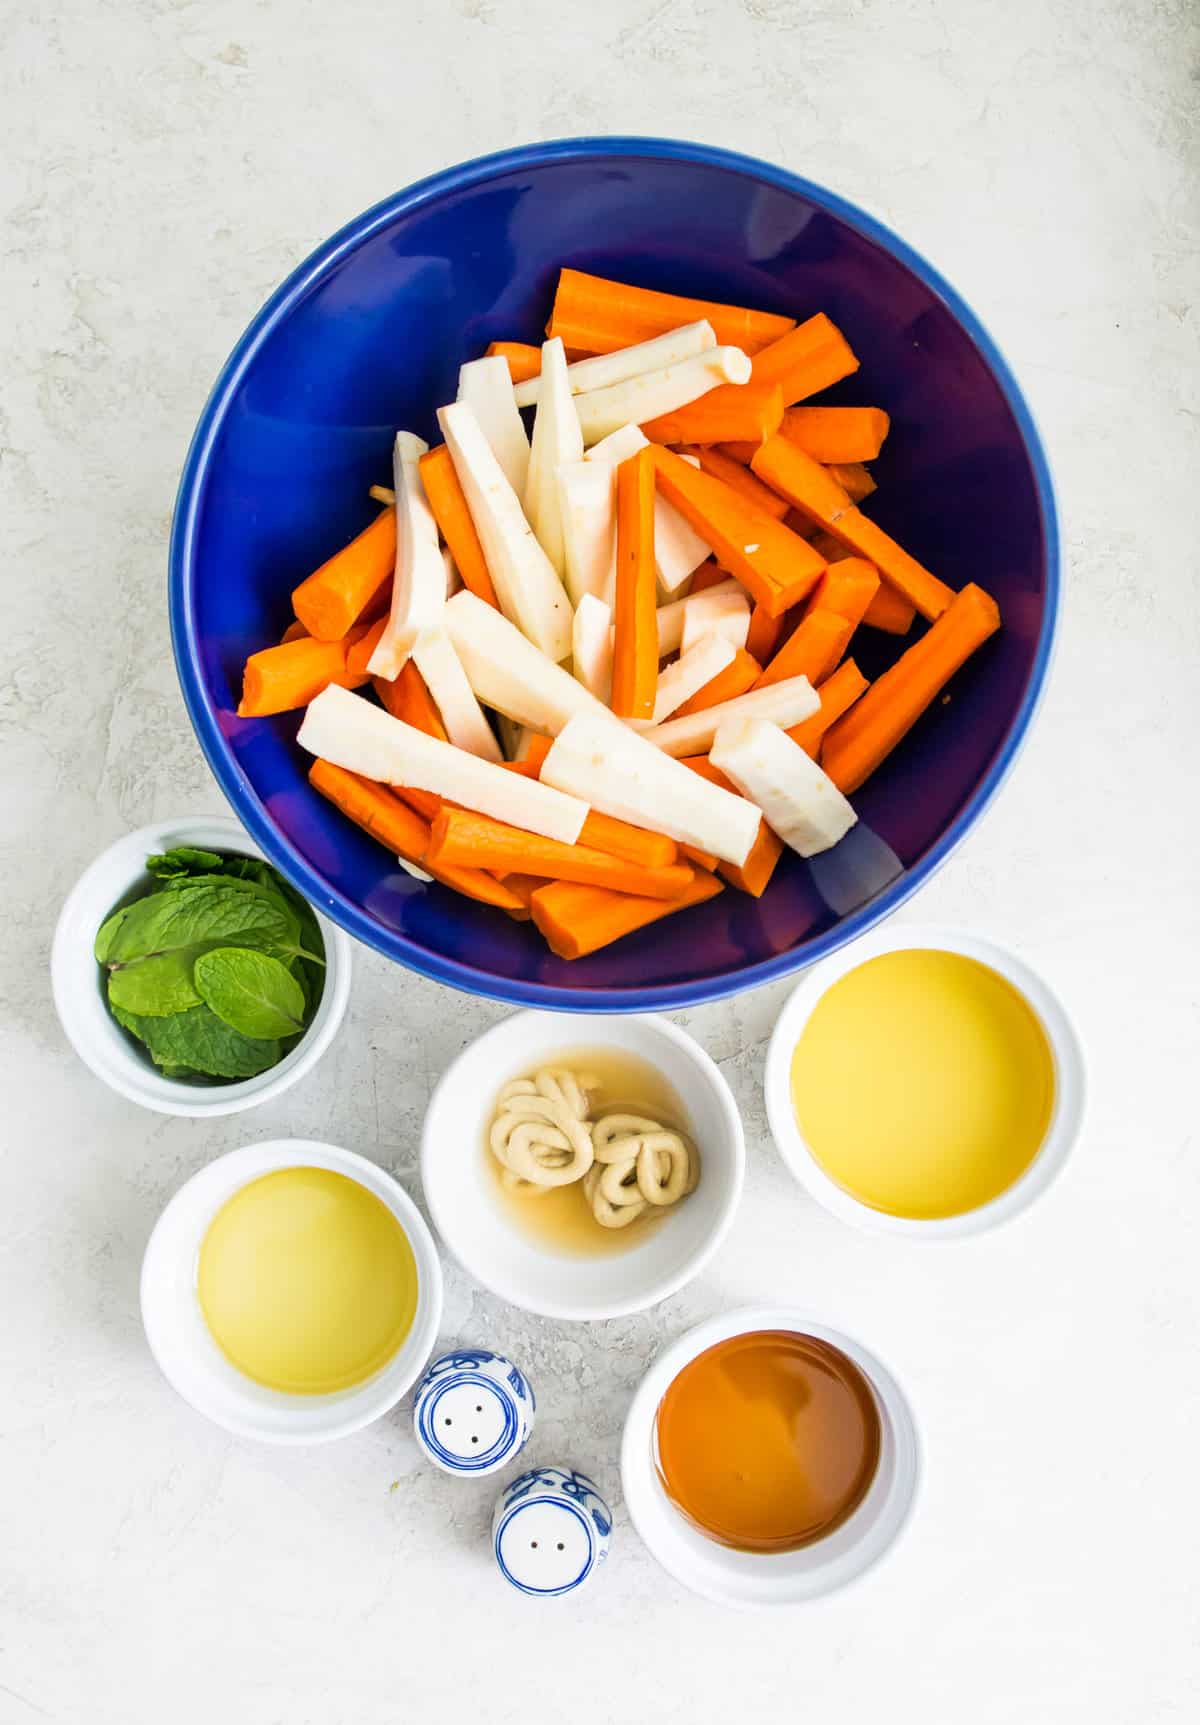 The ingredients needs to make roasted carrots and parsnips separated into bowls.